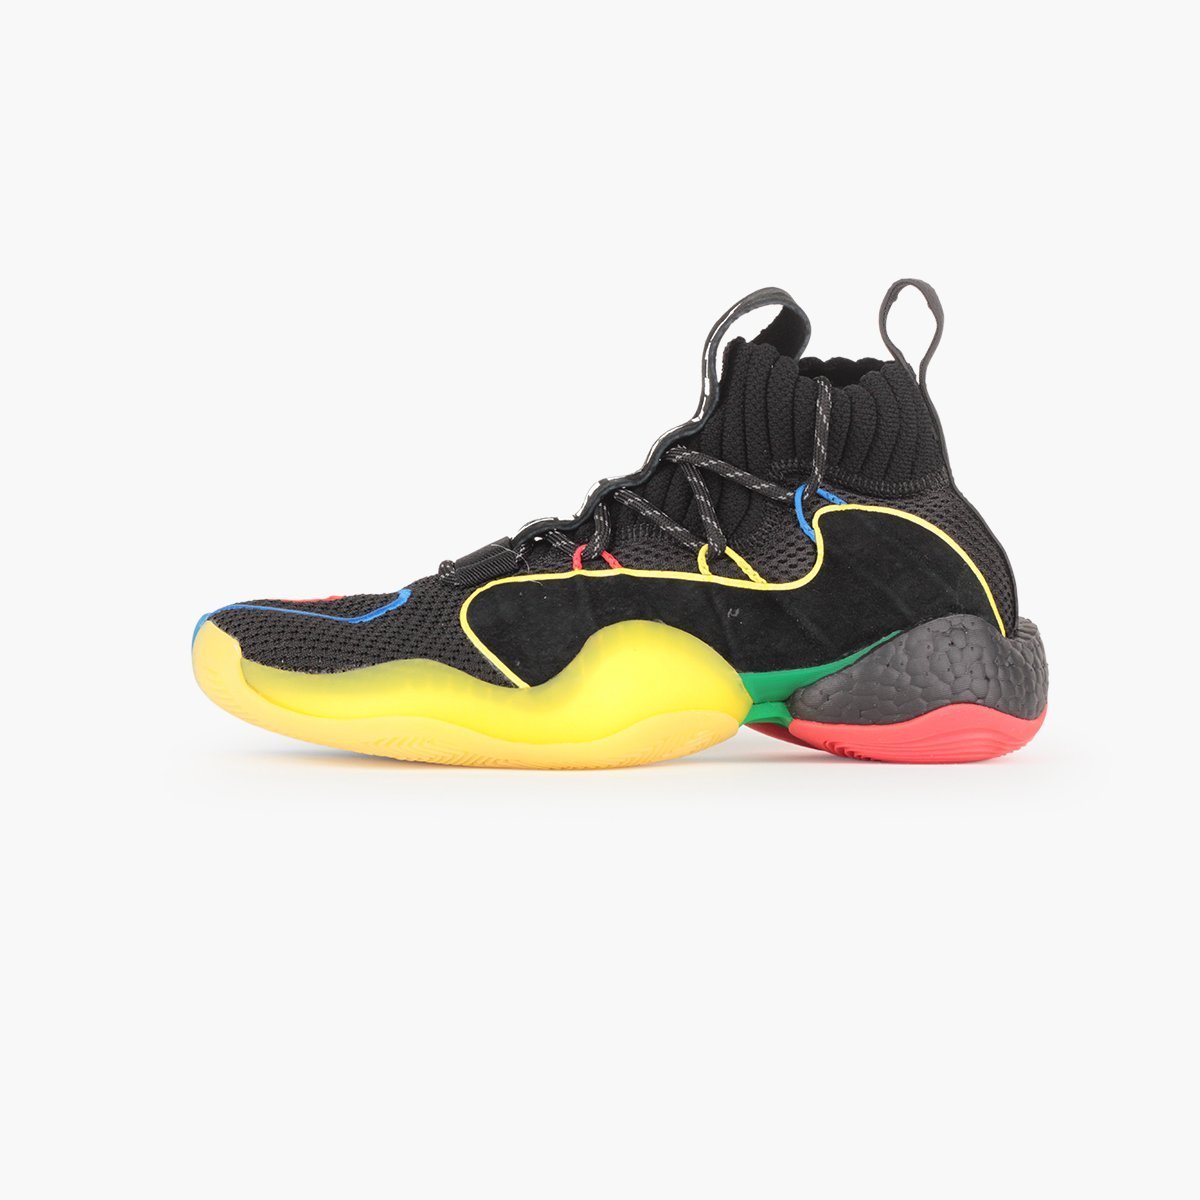 adidas Originals by Pharrell Williams Crazy BYW LVL-SUEDE Store